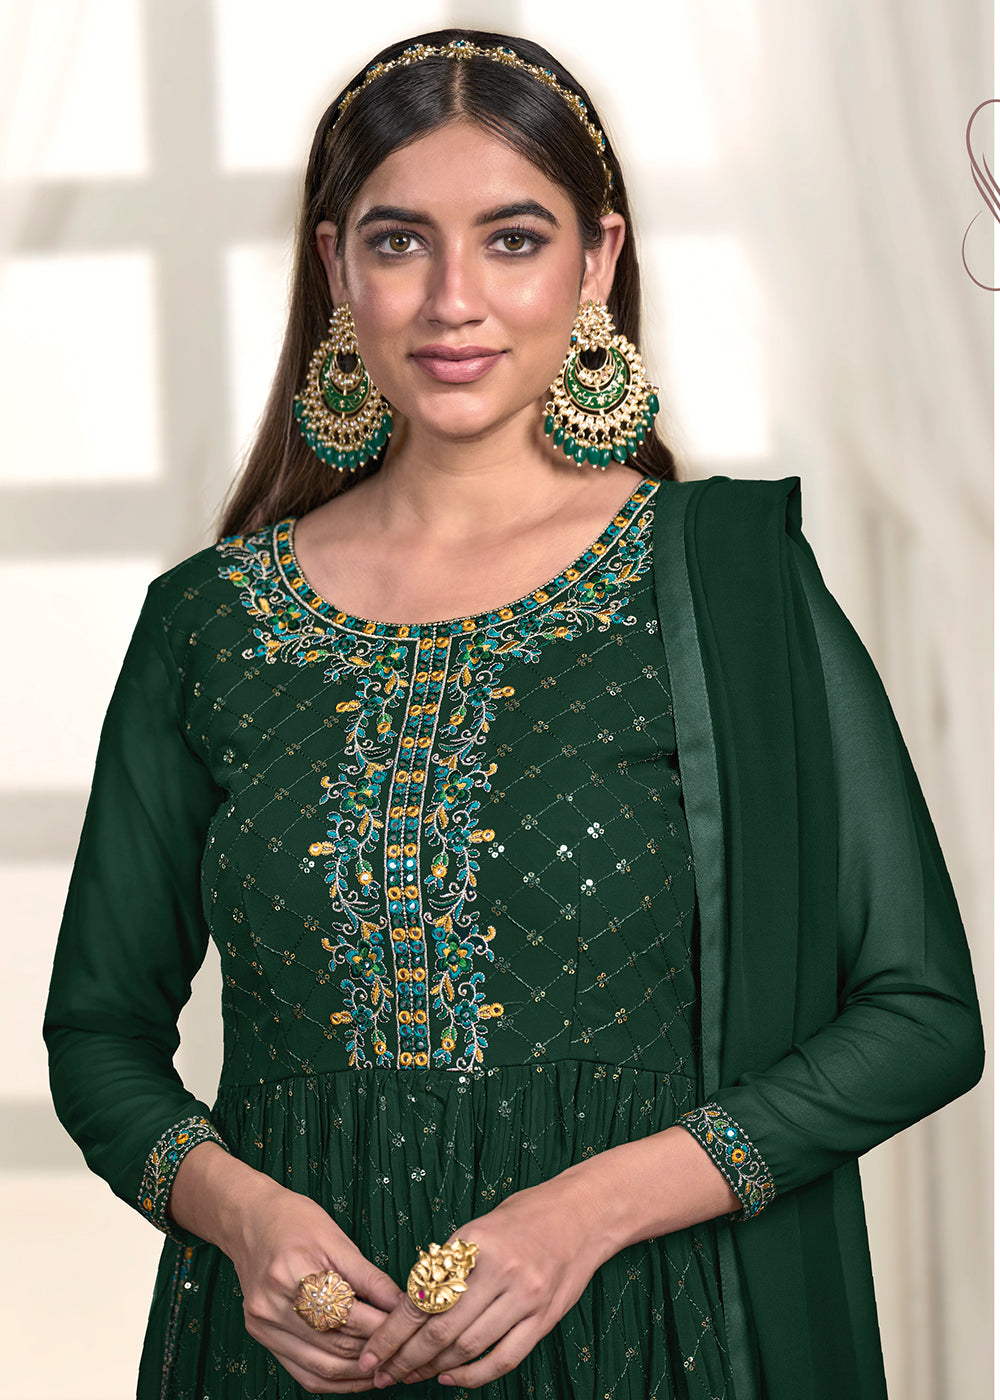 Buy Now Nyra Cut Style Appealing Green Blue Festive Palazzo Suit Online in USA, UK, Canada, Germany, Australia & Worldwide at Empress Clothing. 